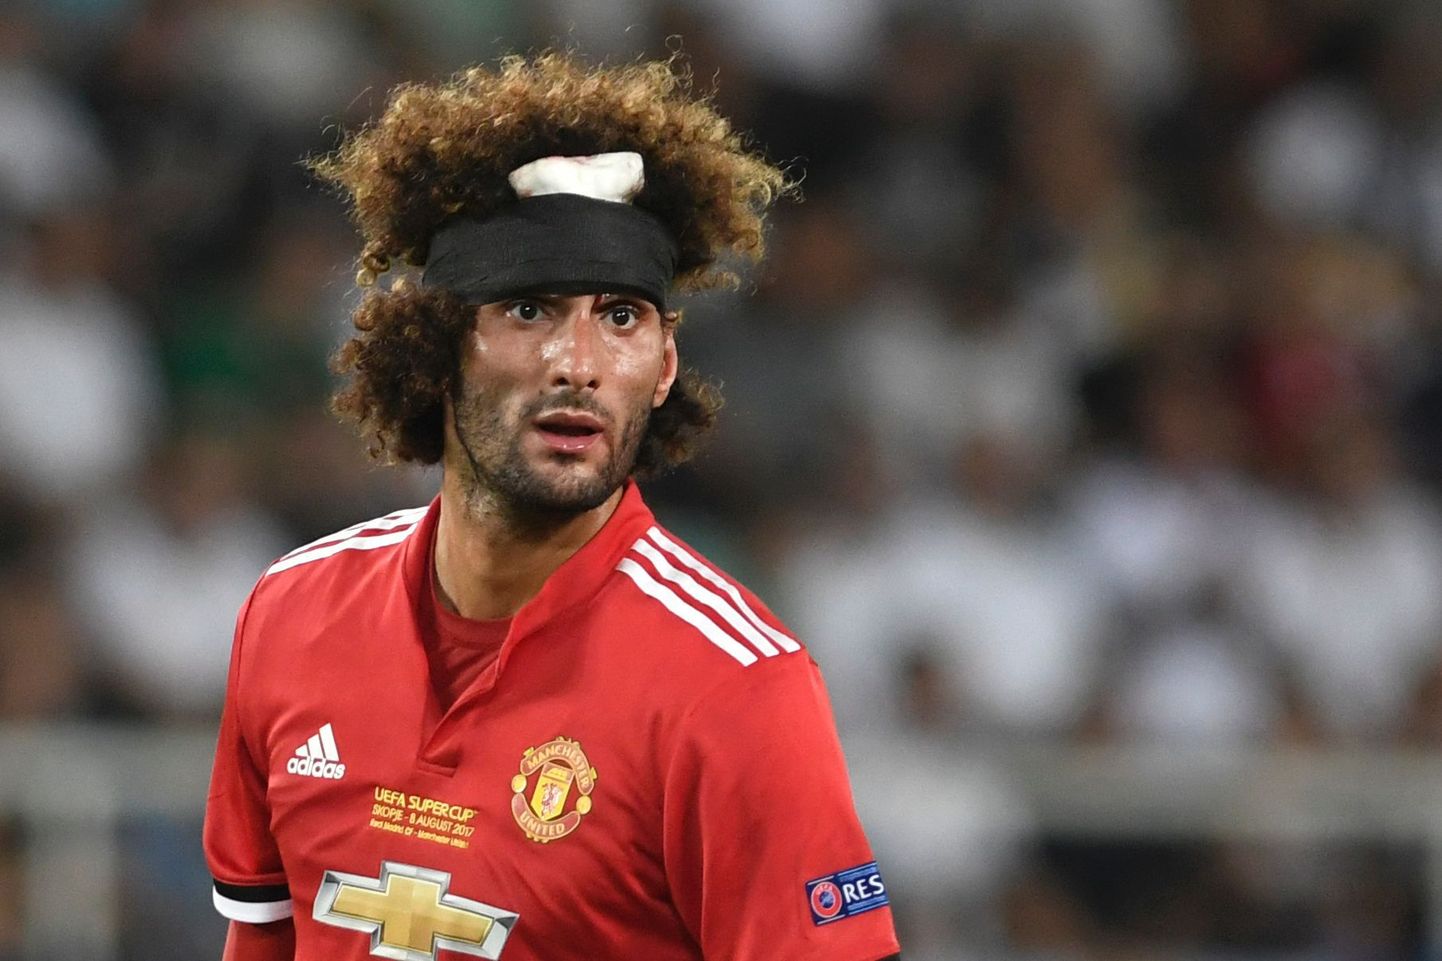 Manchester United's Belgian midfielder Marouane Fellaini looks on during the UEFA Super Cup football match between Real Madrid and Manchester United on August 8, 2017, at the Philip II Arena in Skopje. / AFP PHOTO / Nikolay DOYCHINOV